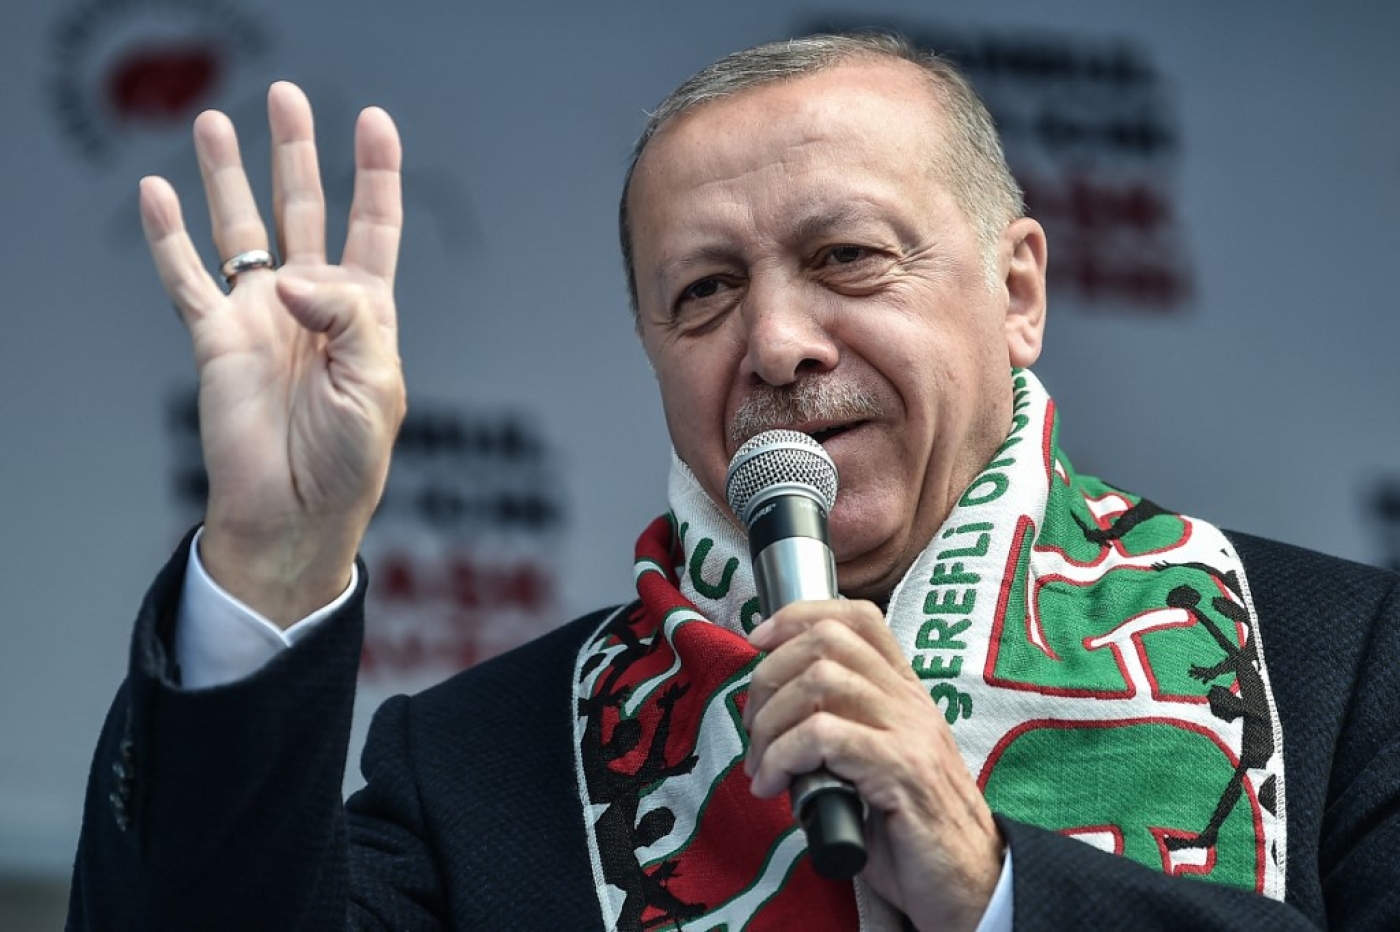 Turkish President Recep Tayyip Erdogan flashes four finger and makes the Rabia sign as he speaks during a pre-election rally at Bayrampasa district in Istanbul, on March 30, 2019. (AFP)